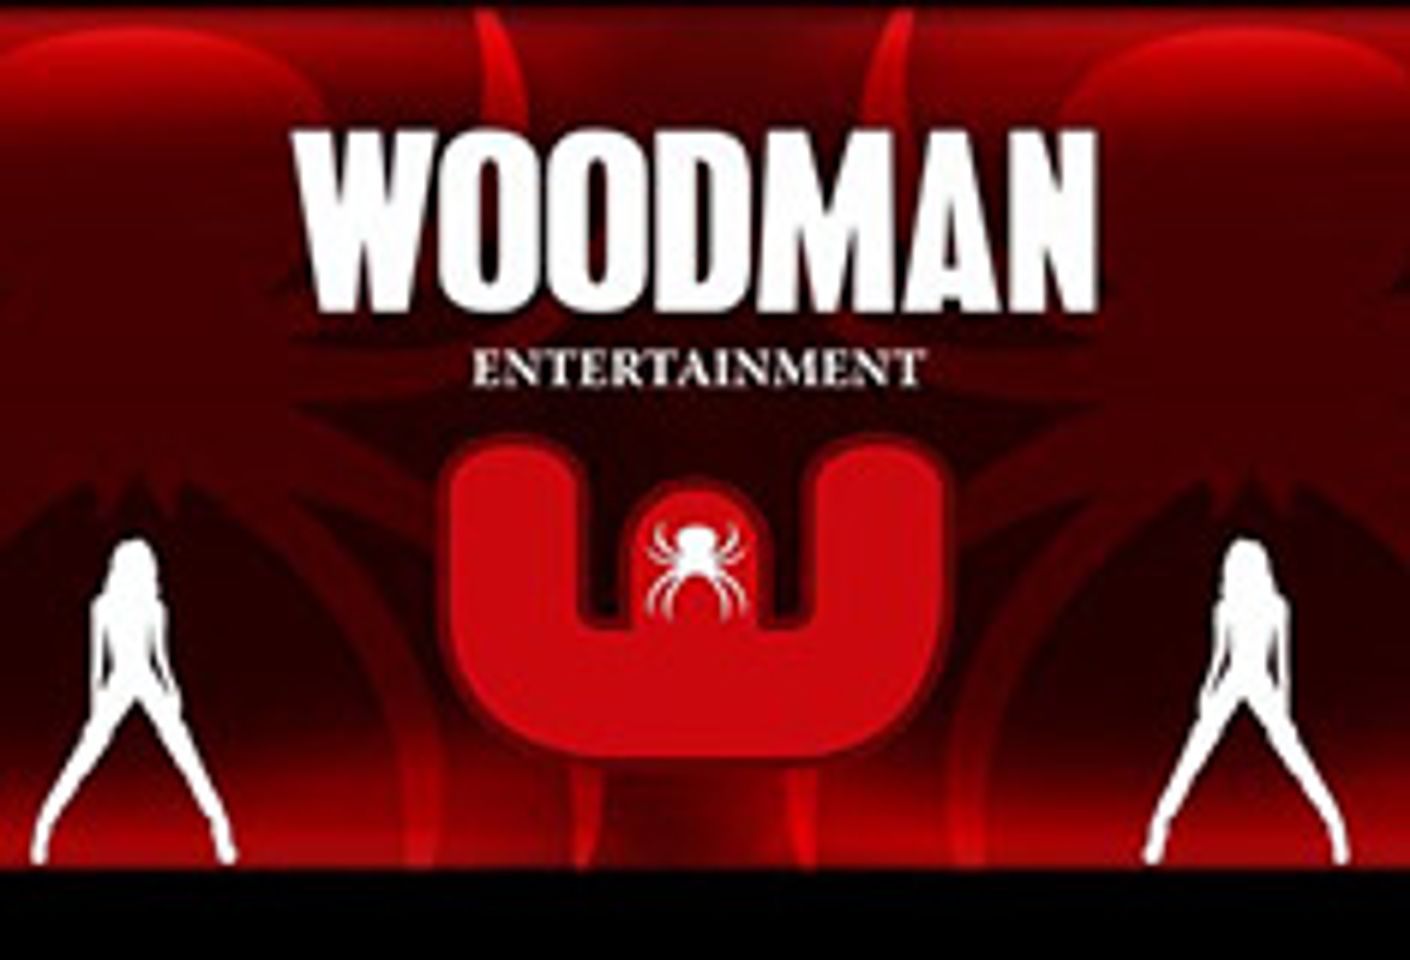 Woodman Signs French Distribution Deal